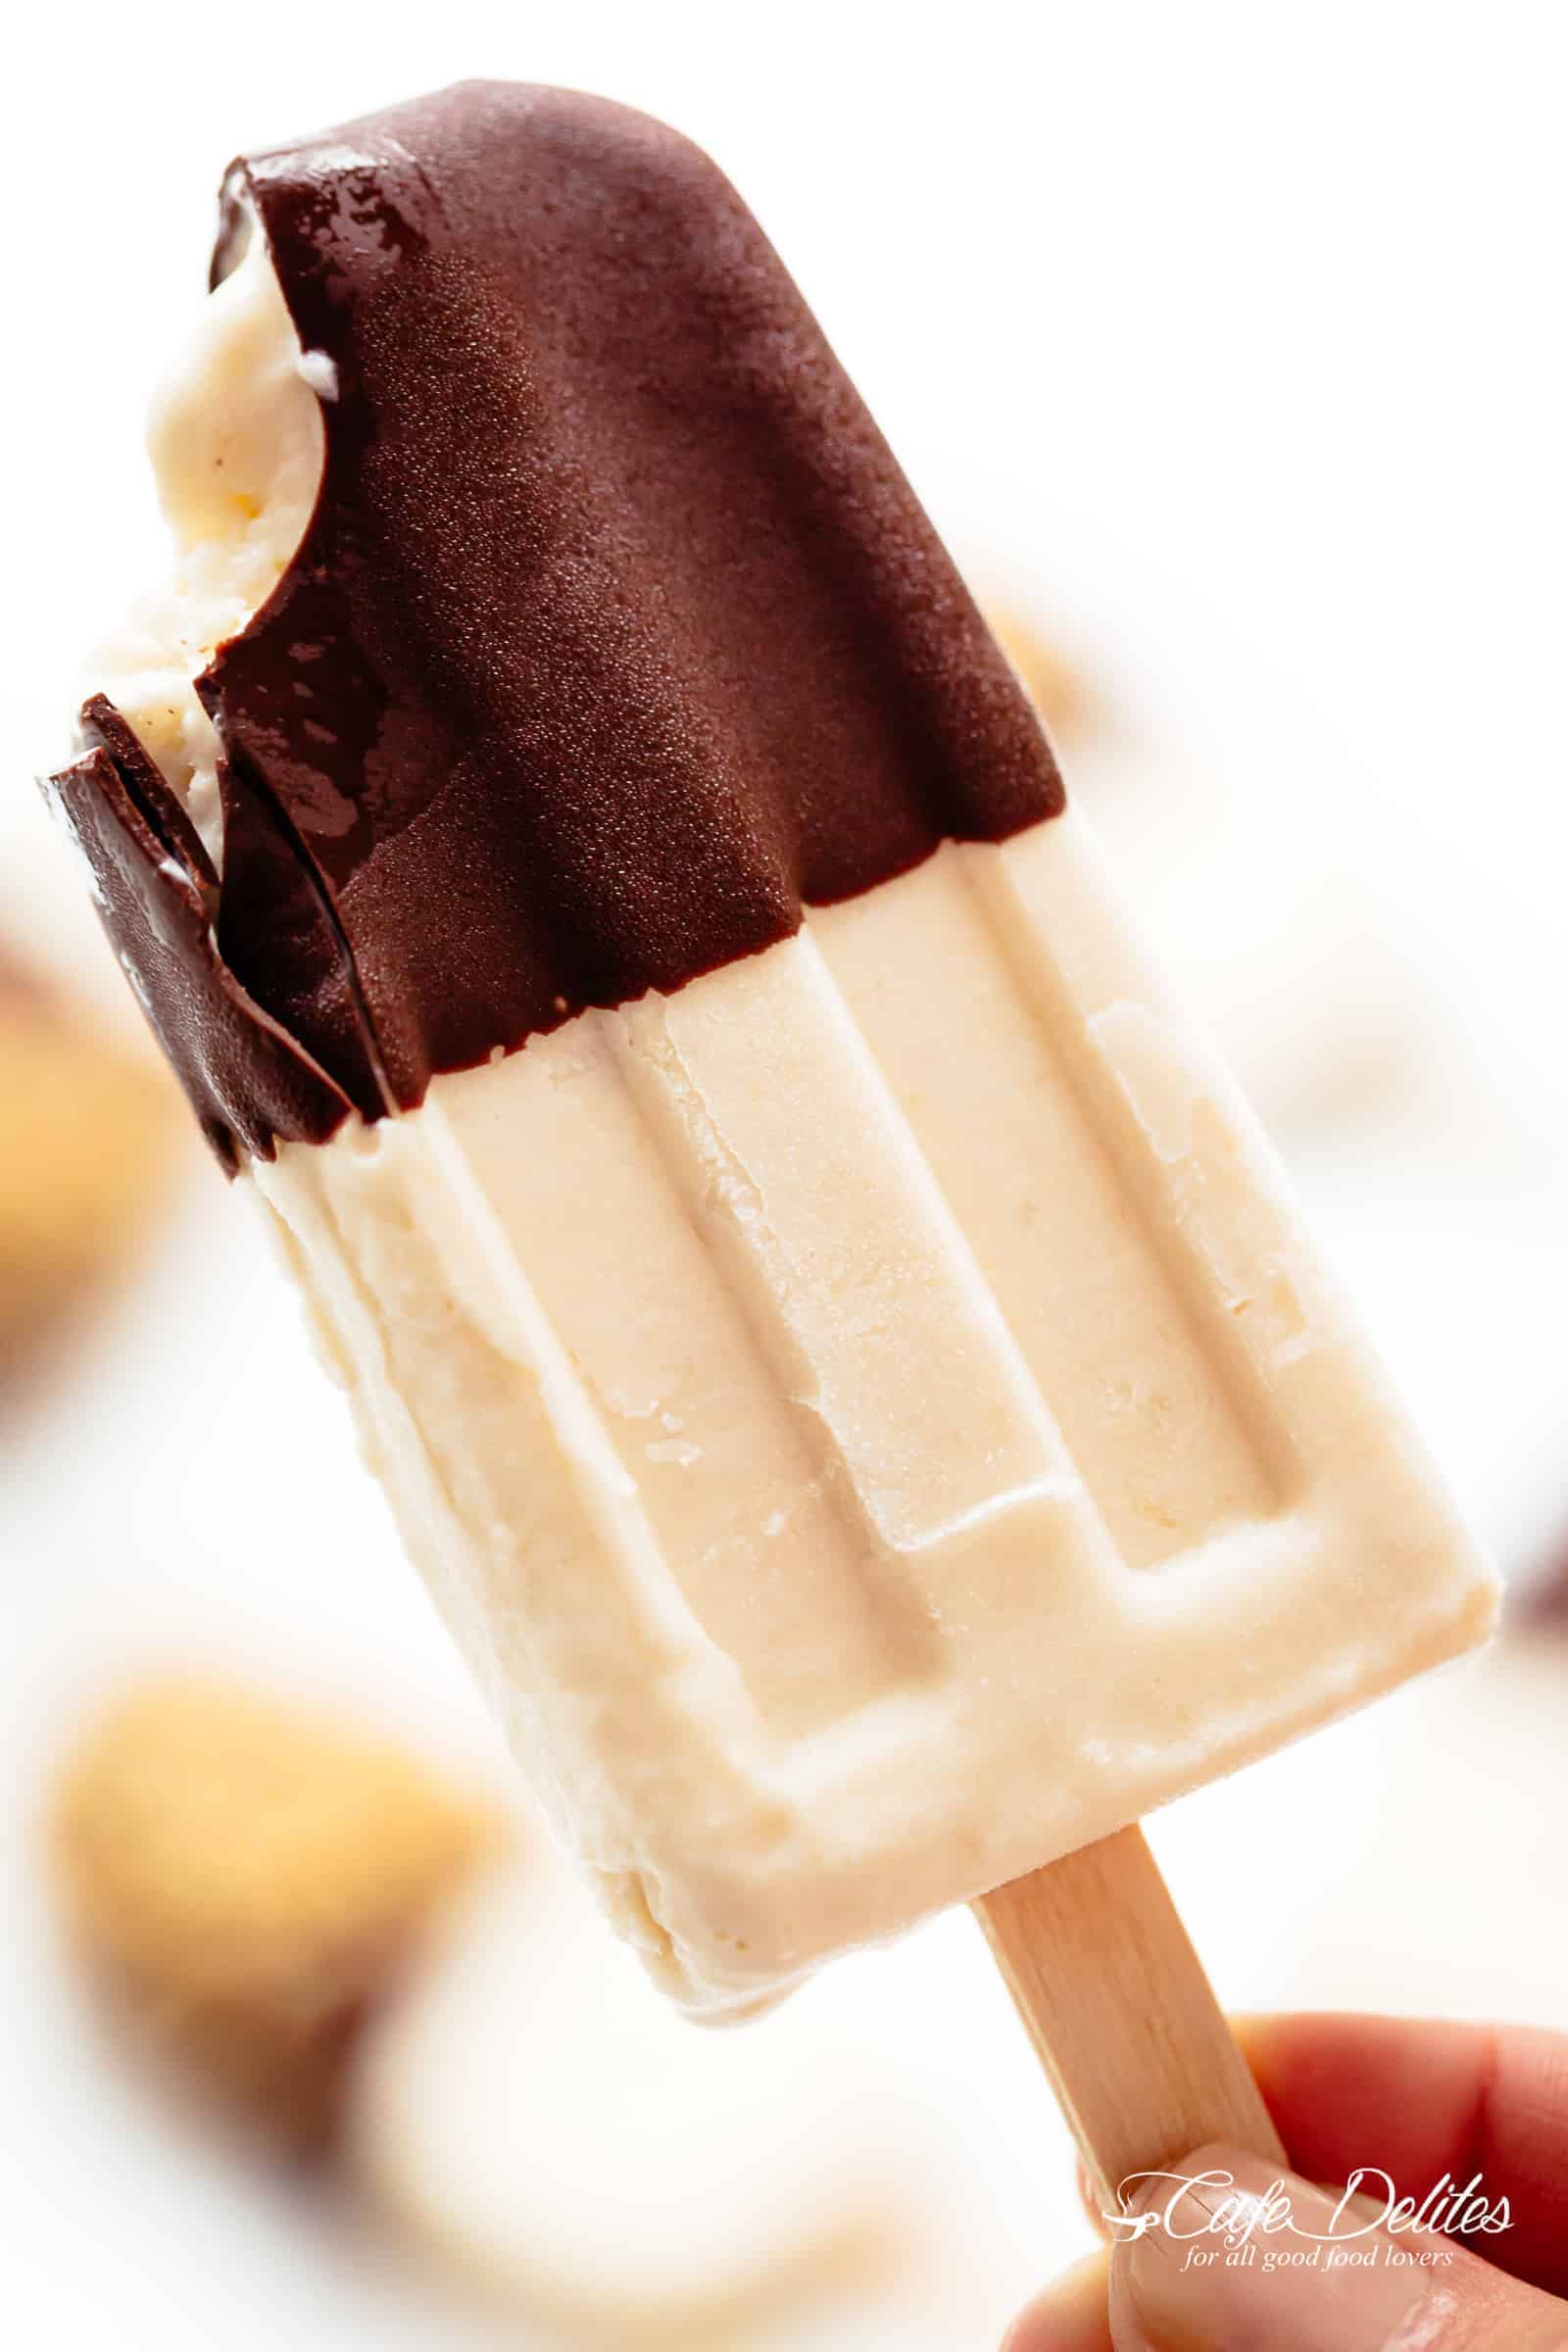 https://cafedelites.com/wp-content/uploads/2018/08/Chocolate-Covered-Banana-Popsicles-8.jpg